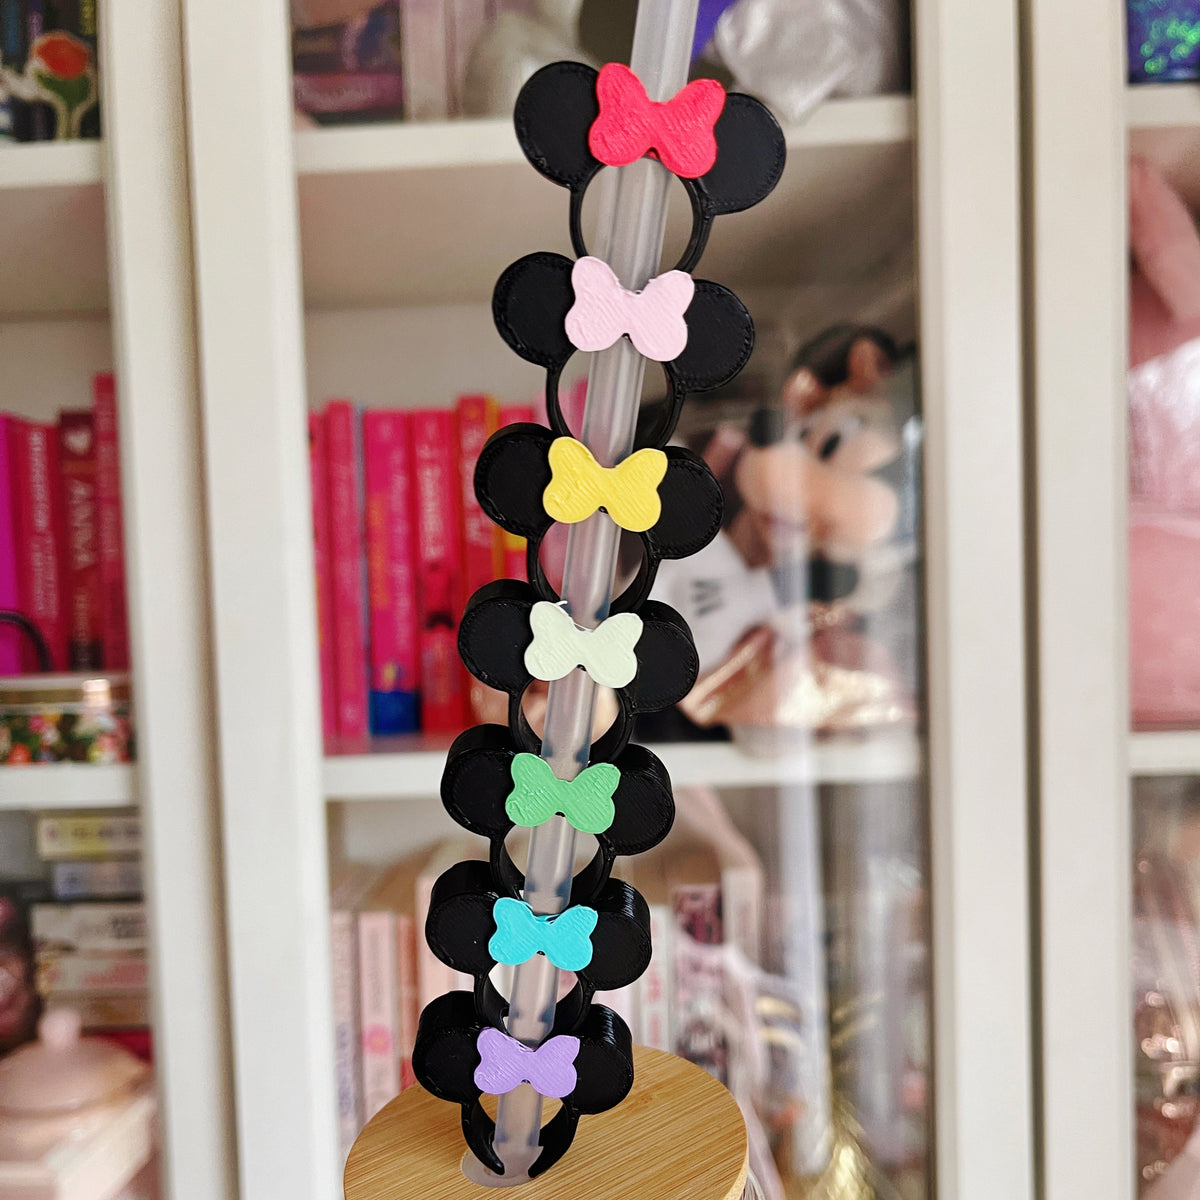 Minnie Mouse inspired straw topper - Disney inspired straw topper